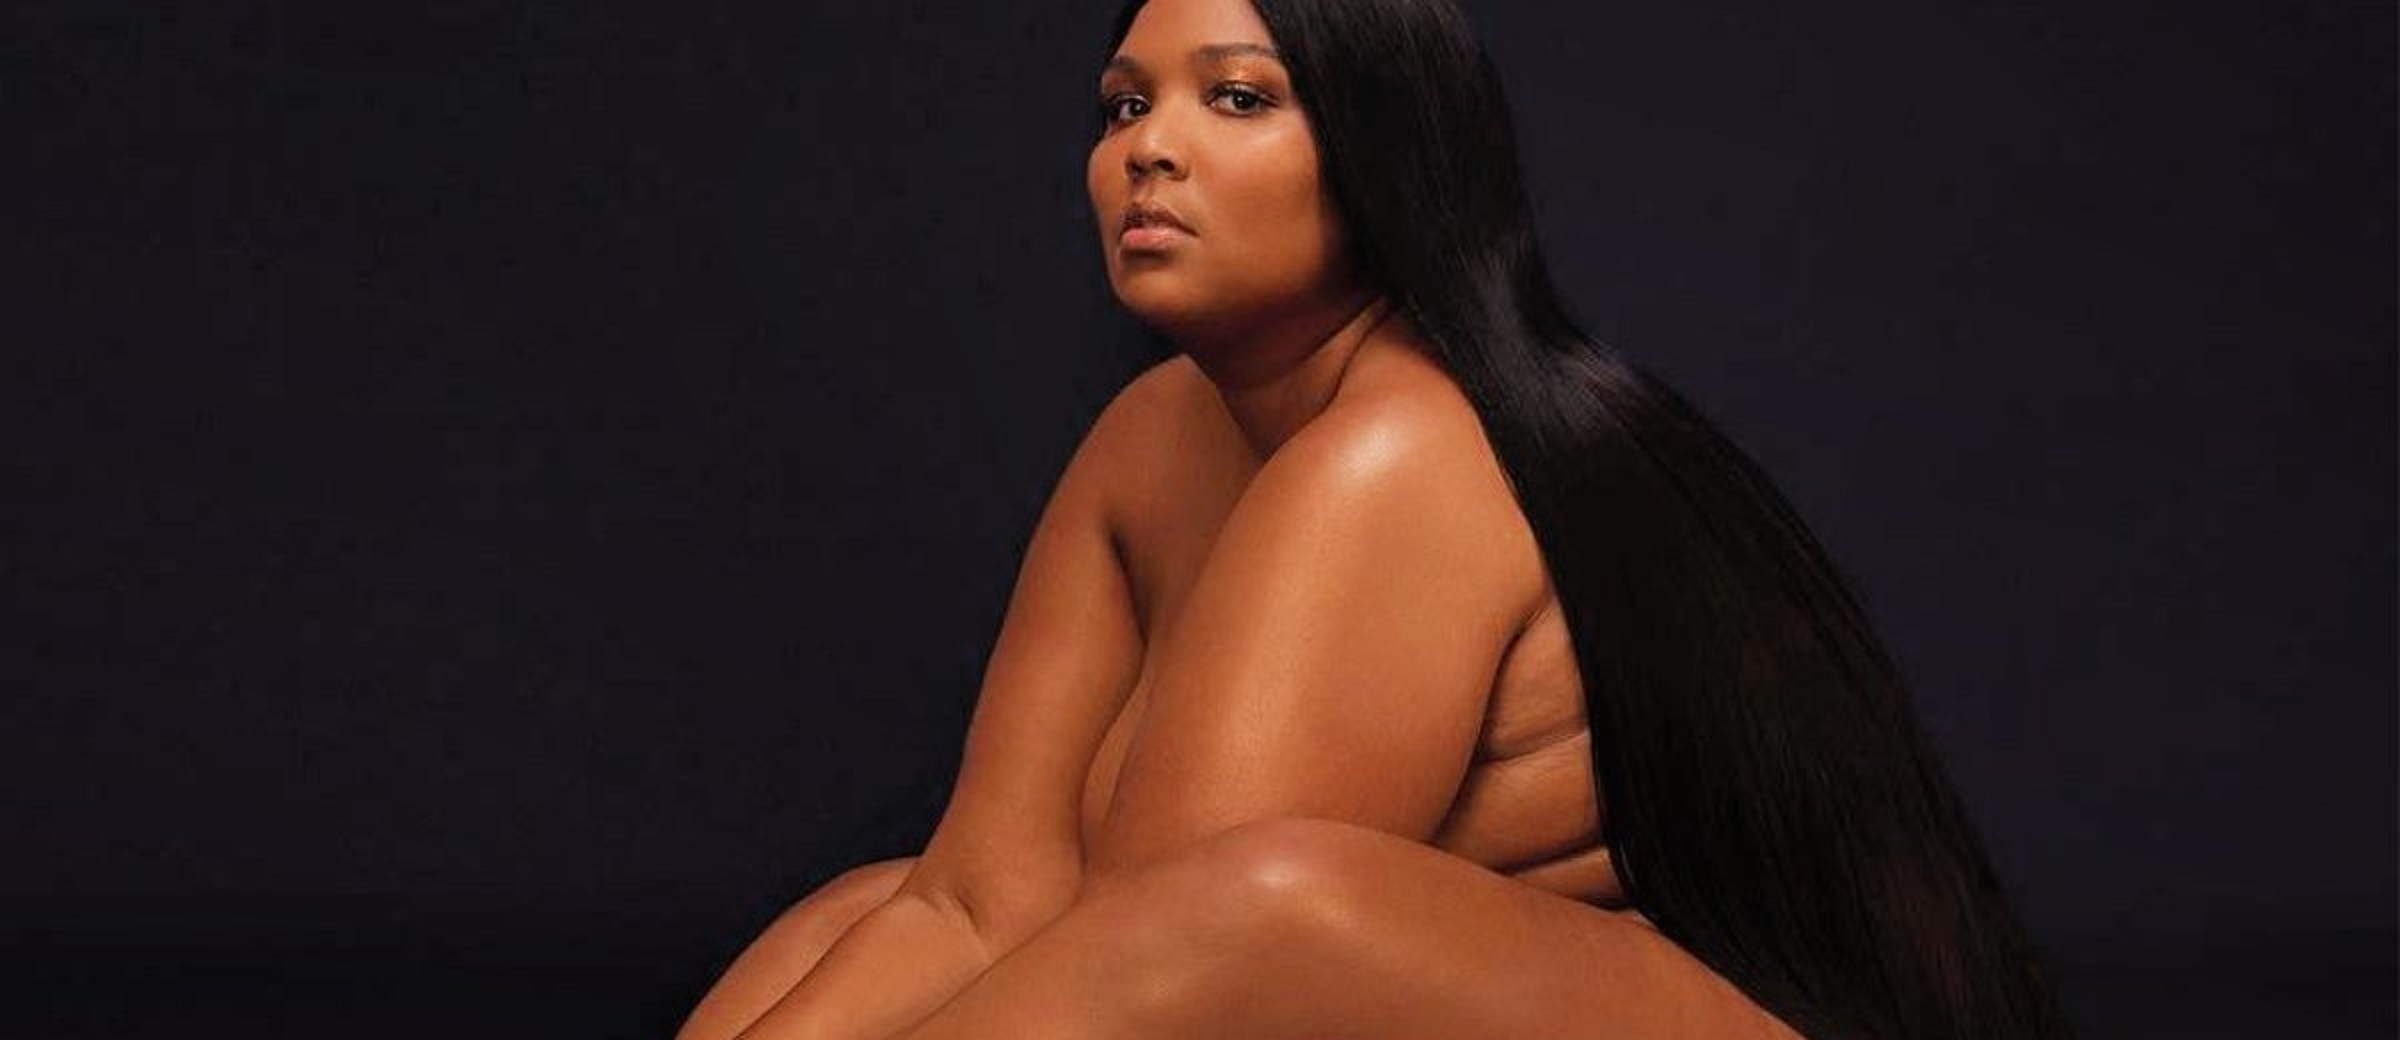 Lizzo Says She’d Like To Give a ‘Special Naked Performance’